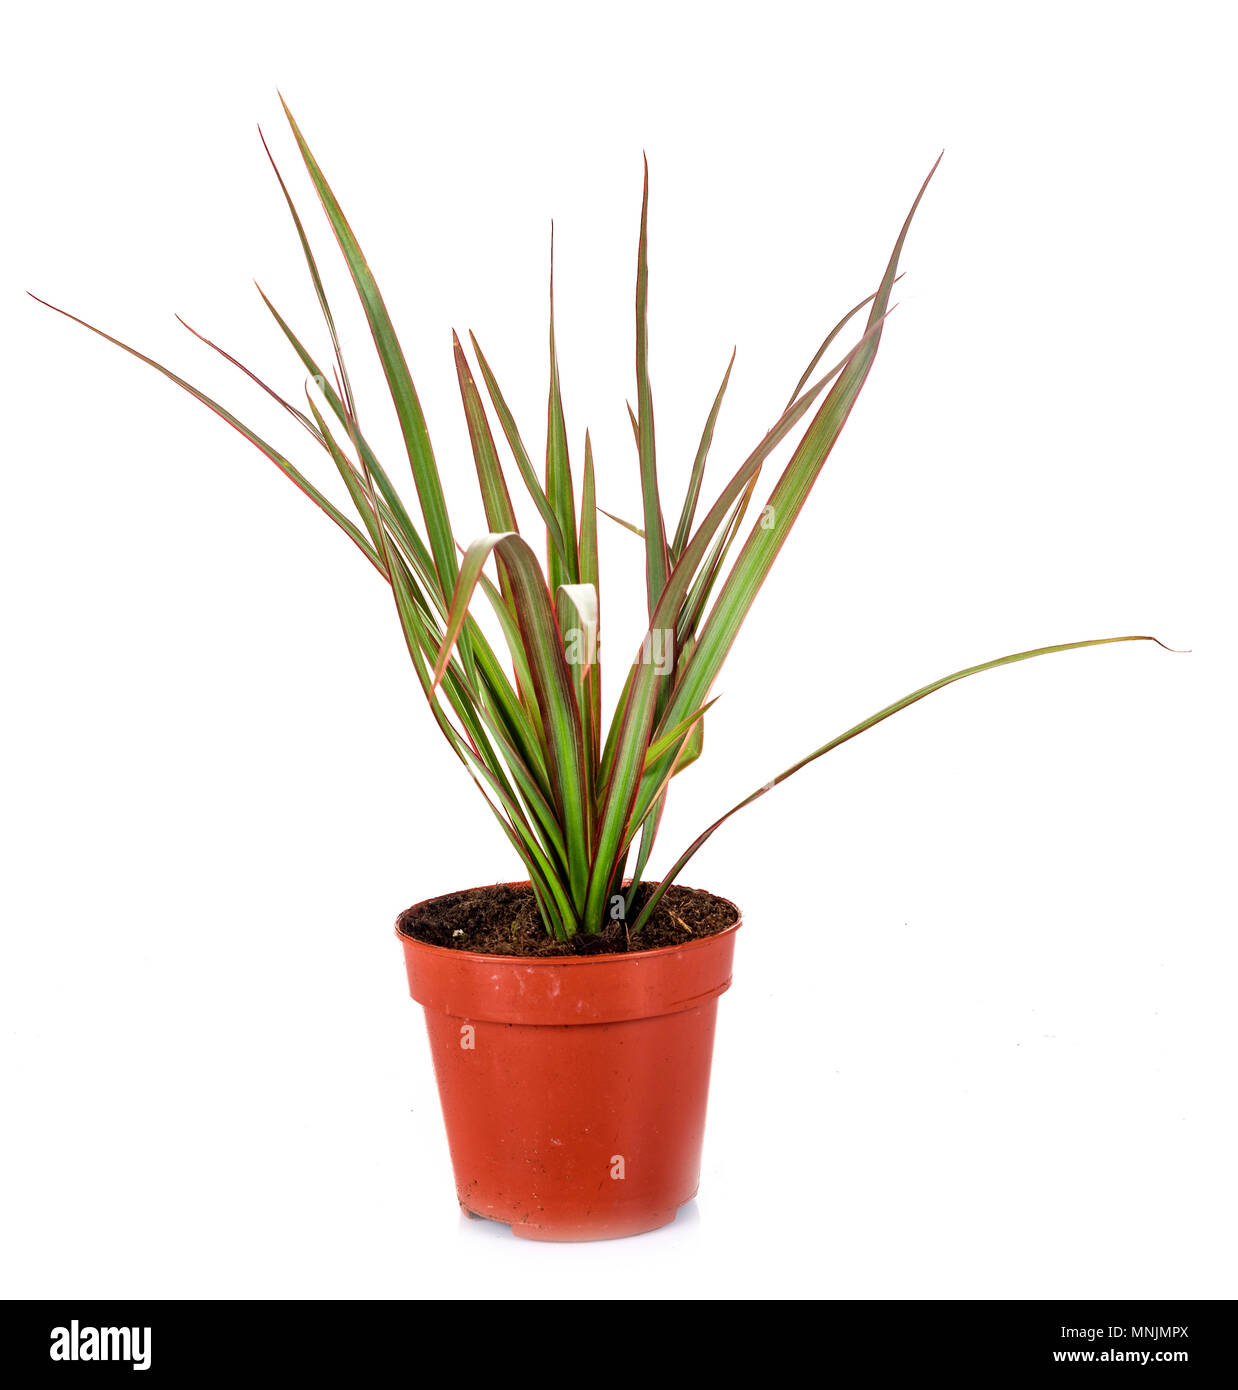 Dracaena plant in front of white background Stock Photo